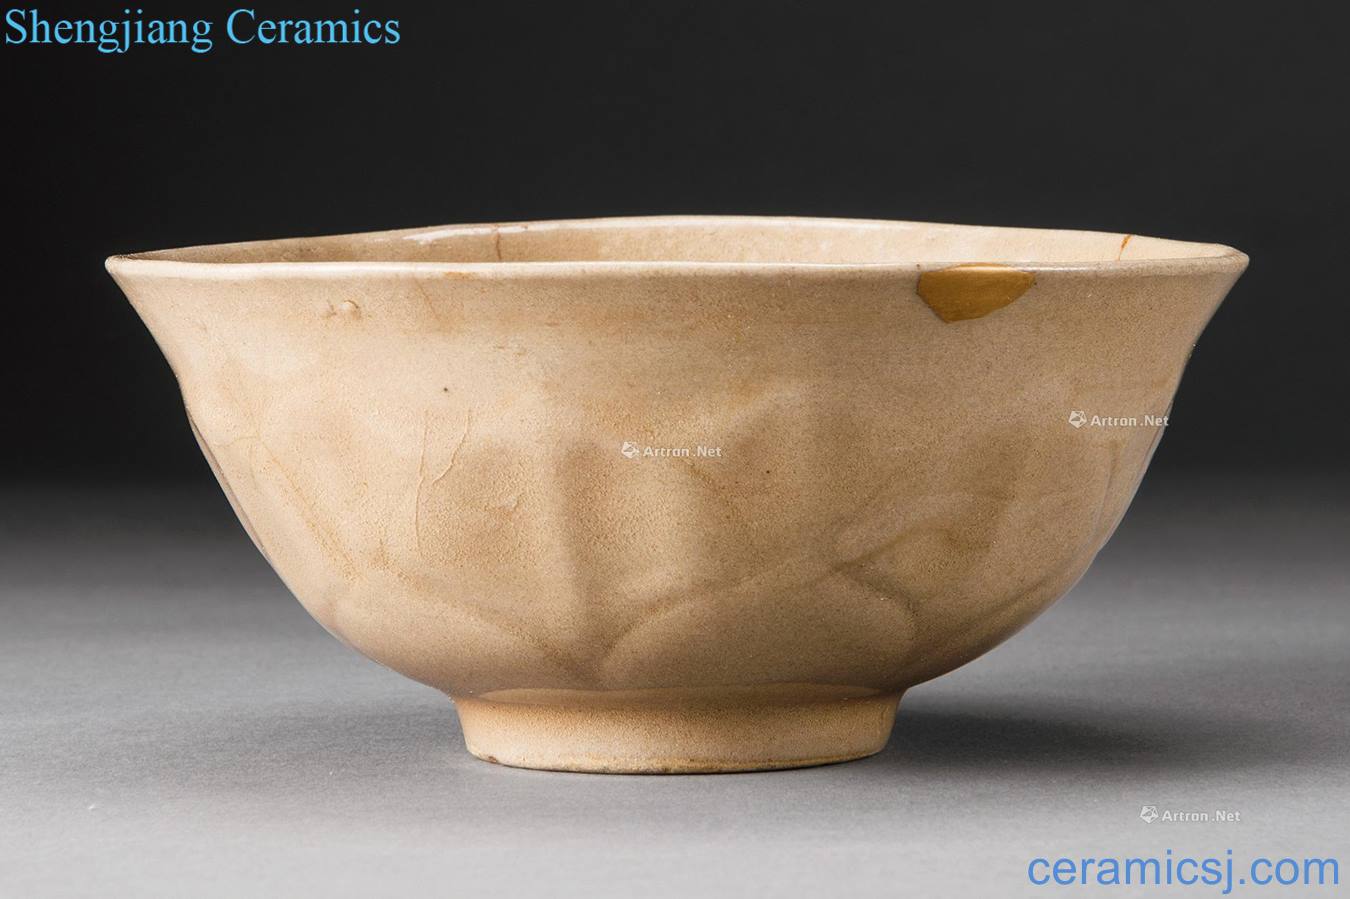 Northern song dynasty yao state kiln handed down lotus-shaped bowl